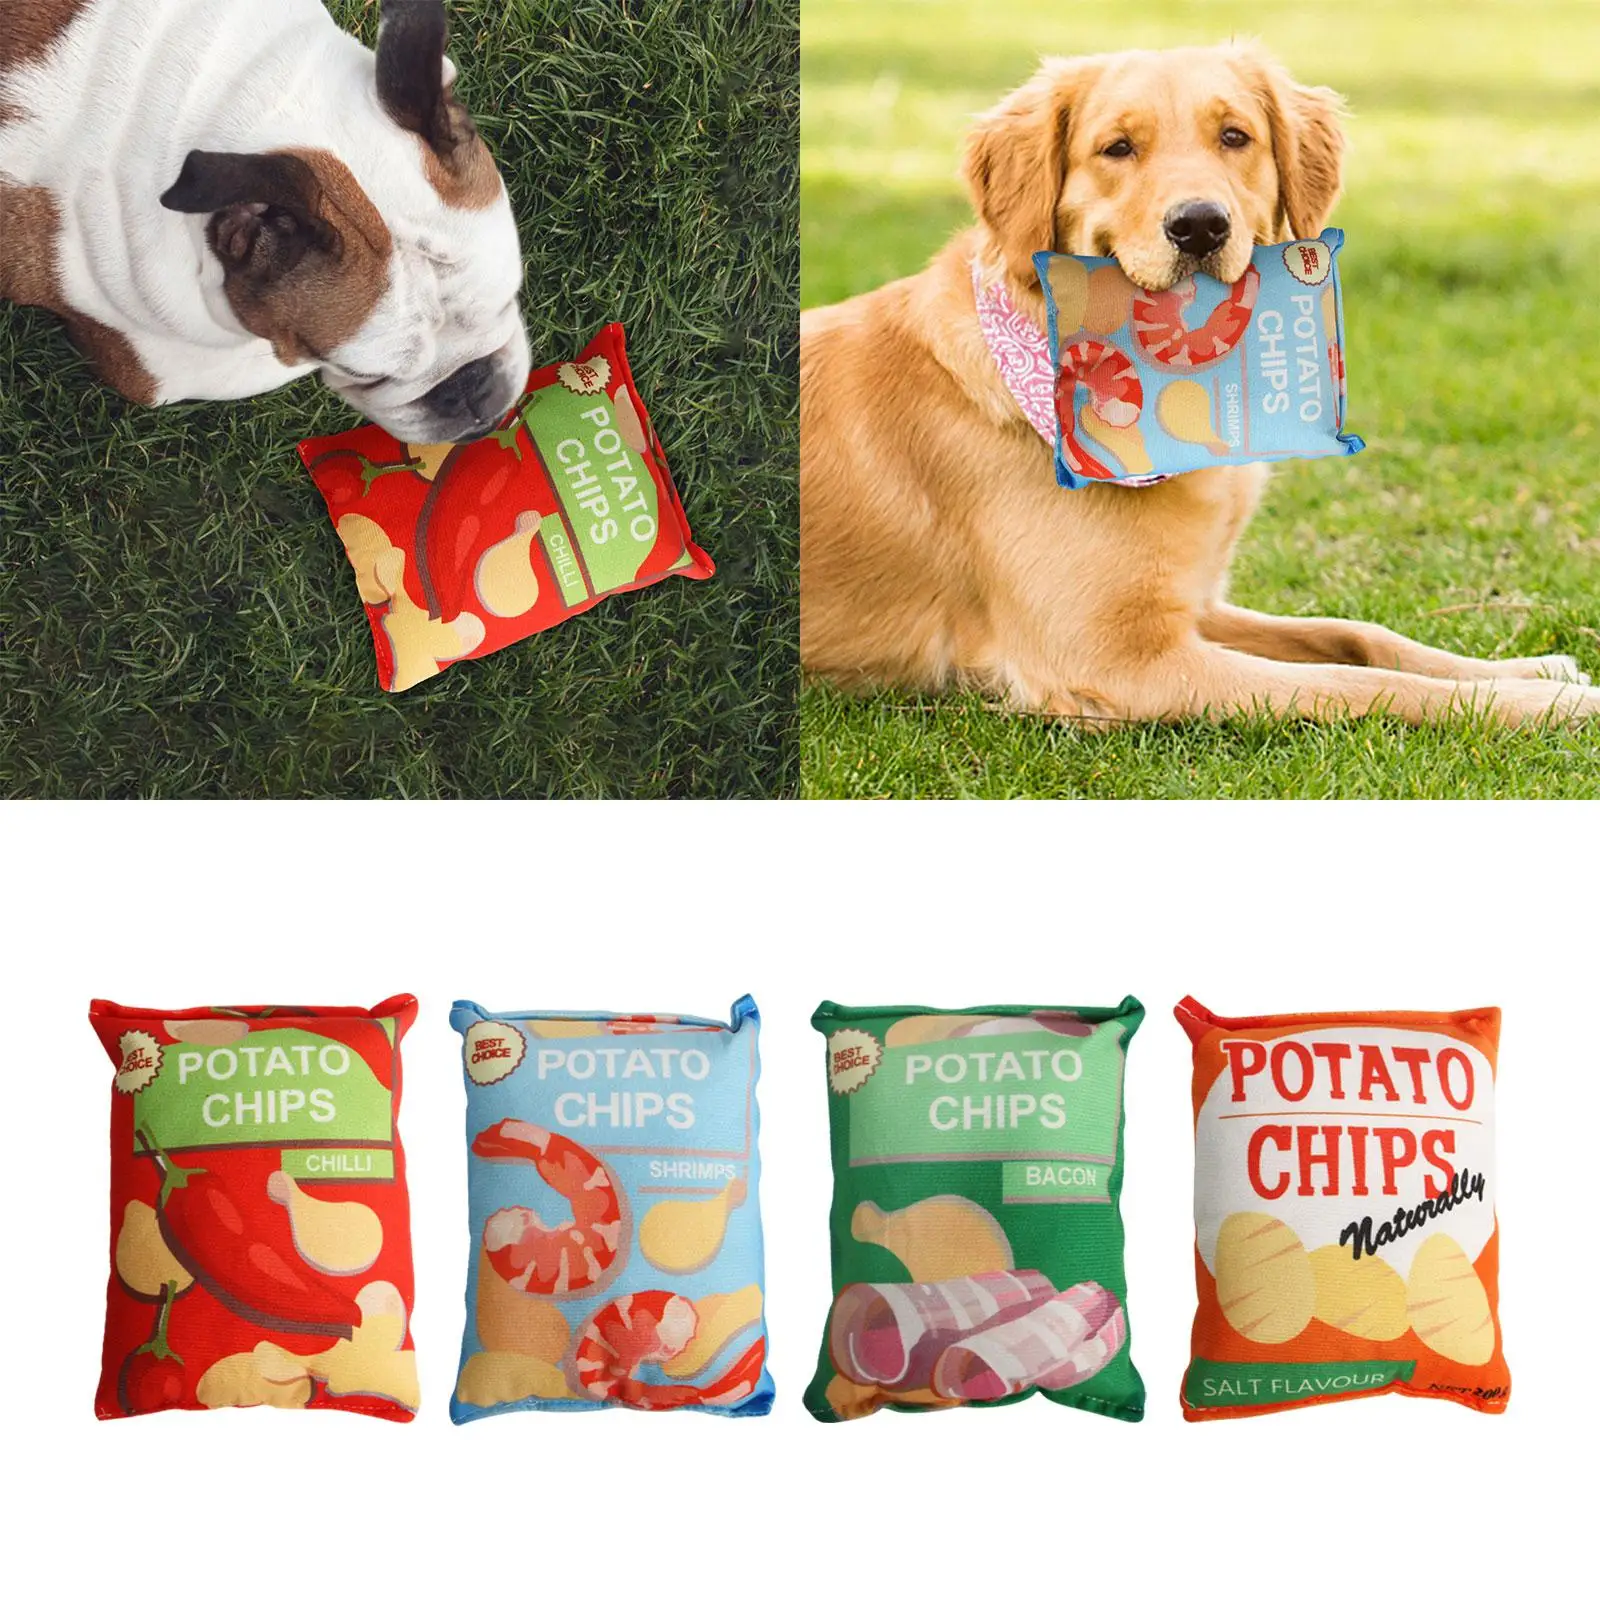 Squeaky Crinkle Paper Dog Toys Poratble Soft Dog Supplies Durable Stuffed Dog Toy for Indoor Dog Toy Puppy Toy Small Medium Dogs